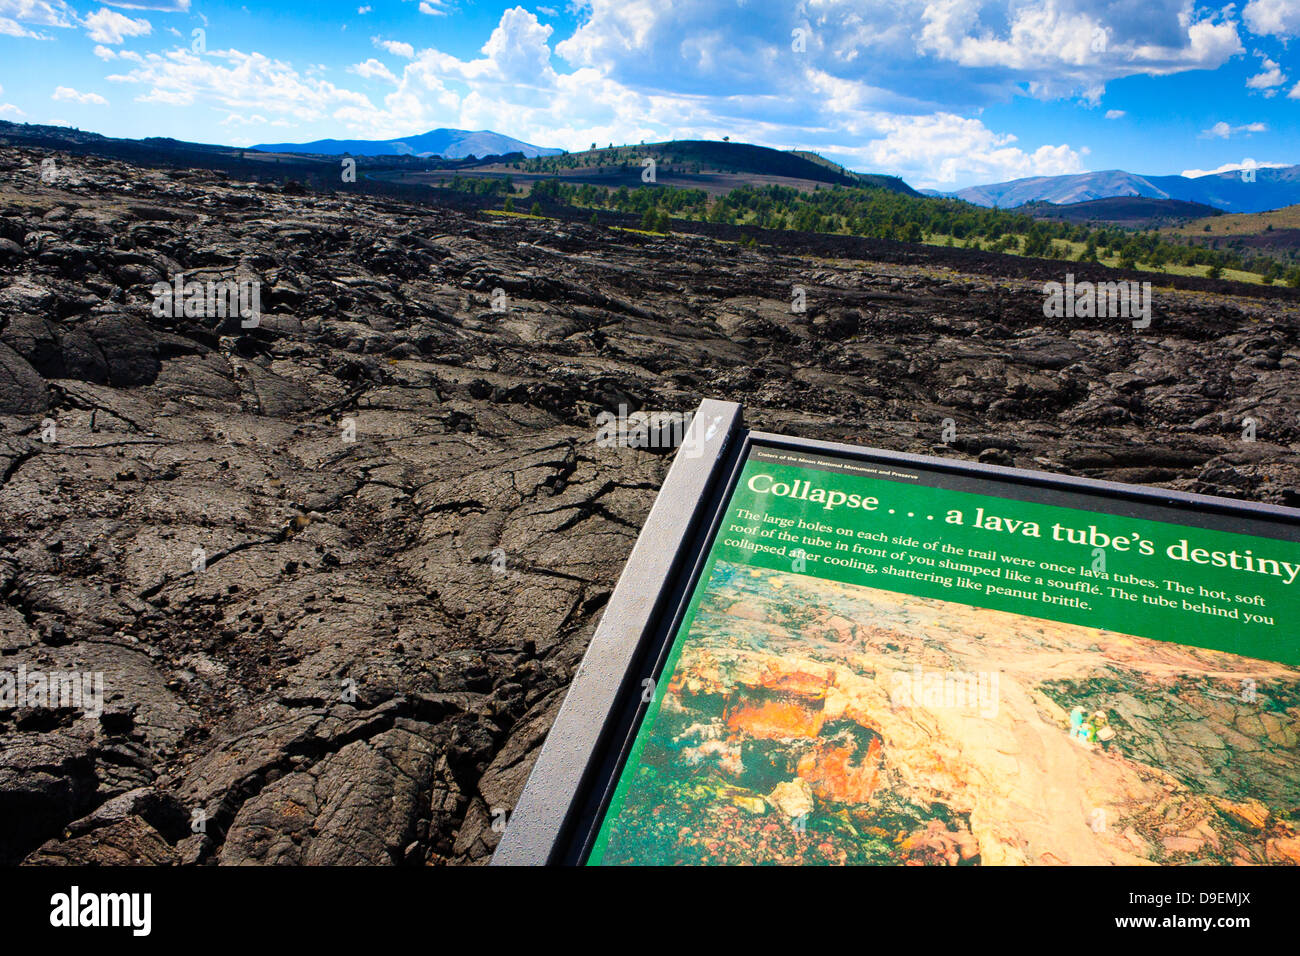 Lava fields on partly cloudy day at Craters of the Moon National Monument, with sign in foreground discussing lava tubes Stock Photo